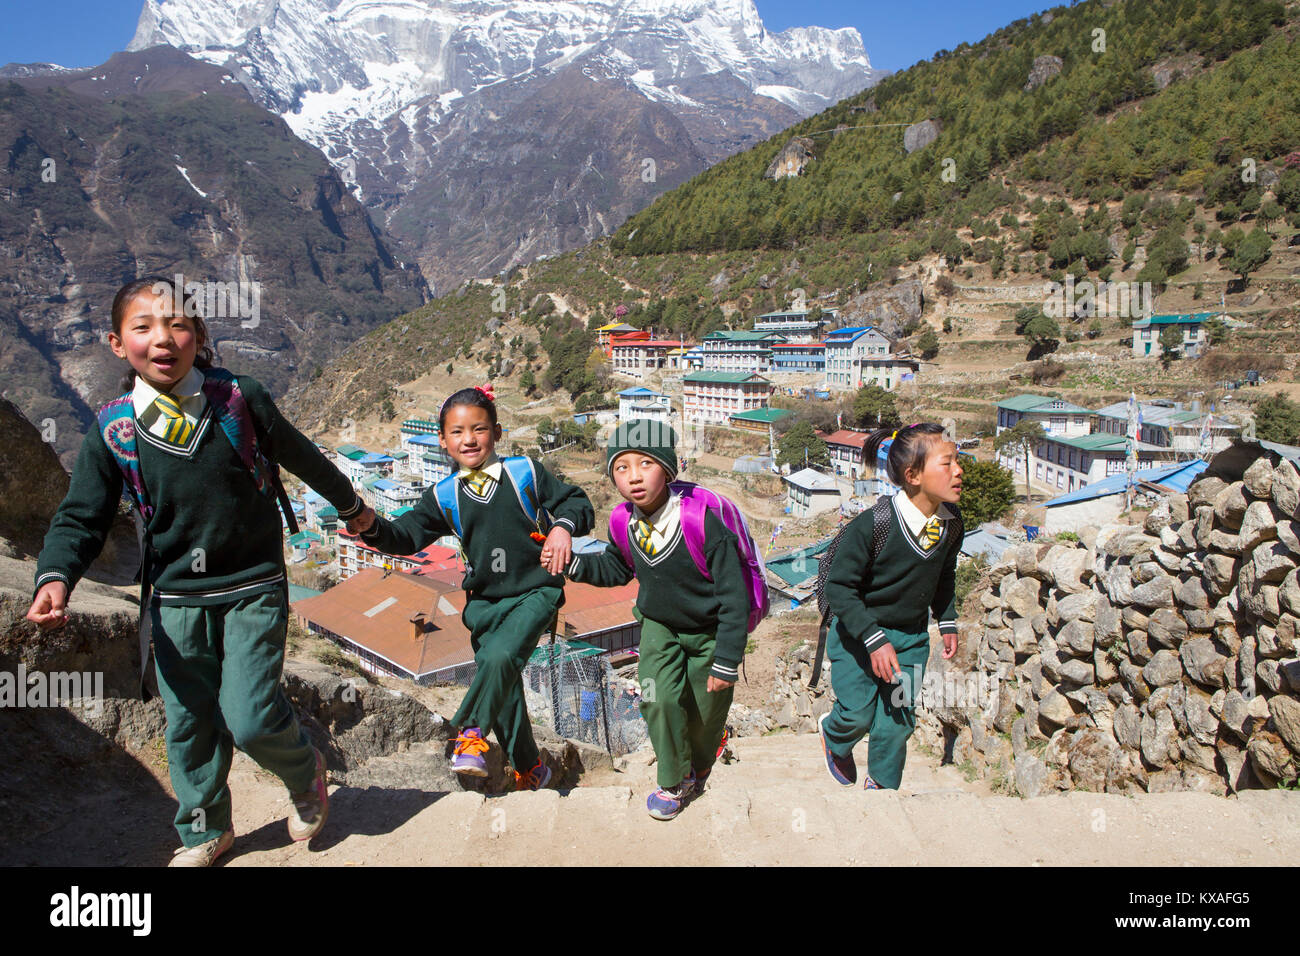 Four young children dressed in school uniforms are walking in hilly Namche Bazar, a mountain village in the Nepalese Khumbu valley. Stock Photo